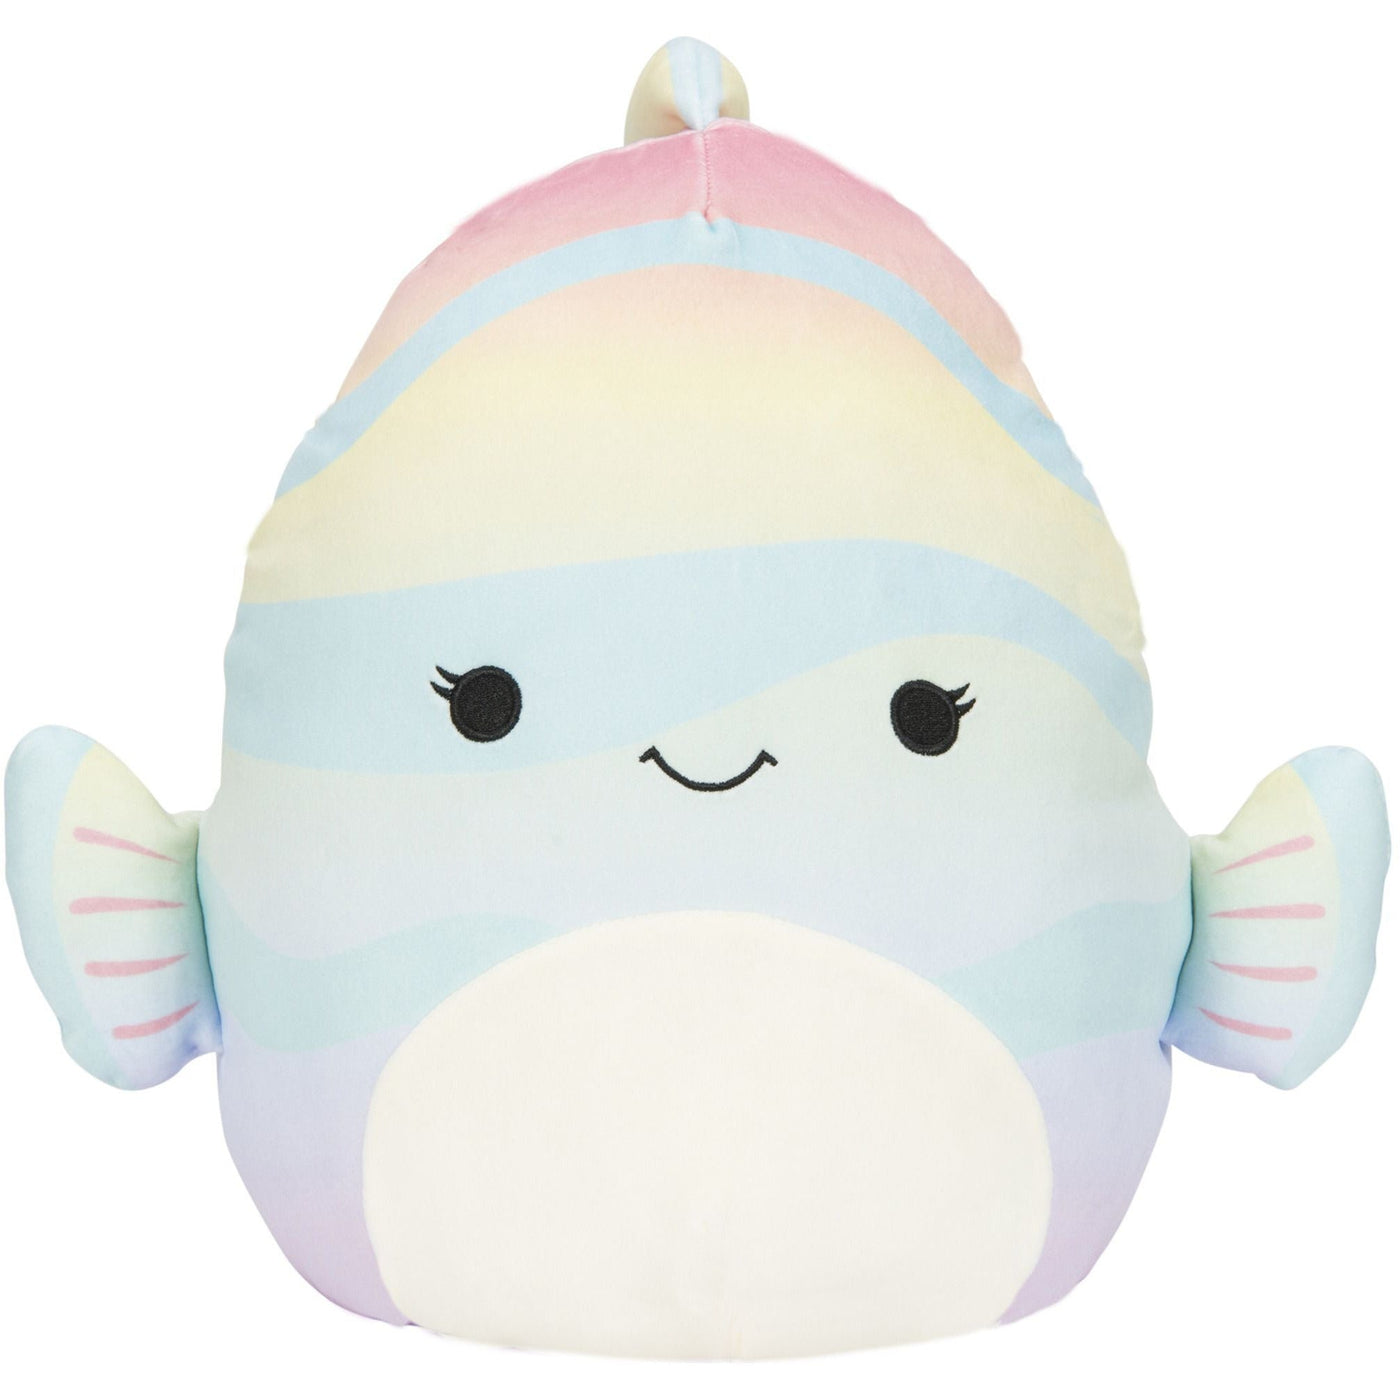 Squishmallows - 12in Plush Soft Toy - Sealife-Squishmallows-Squishmallows-Canda the Rainbow Fish-Yes Bebe